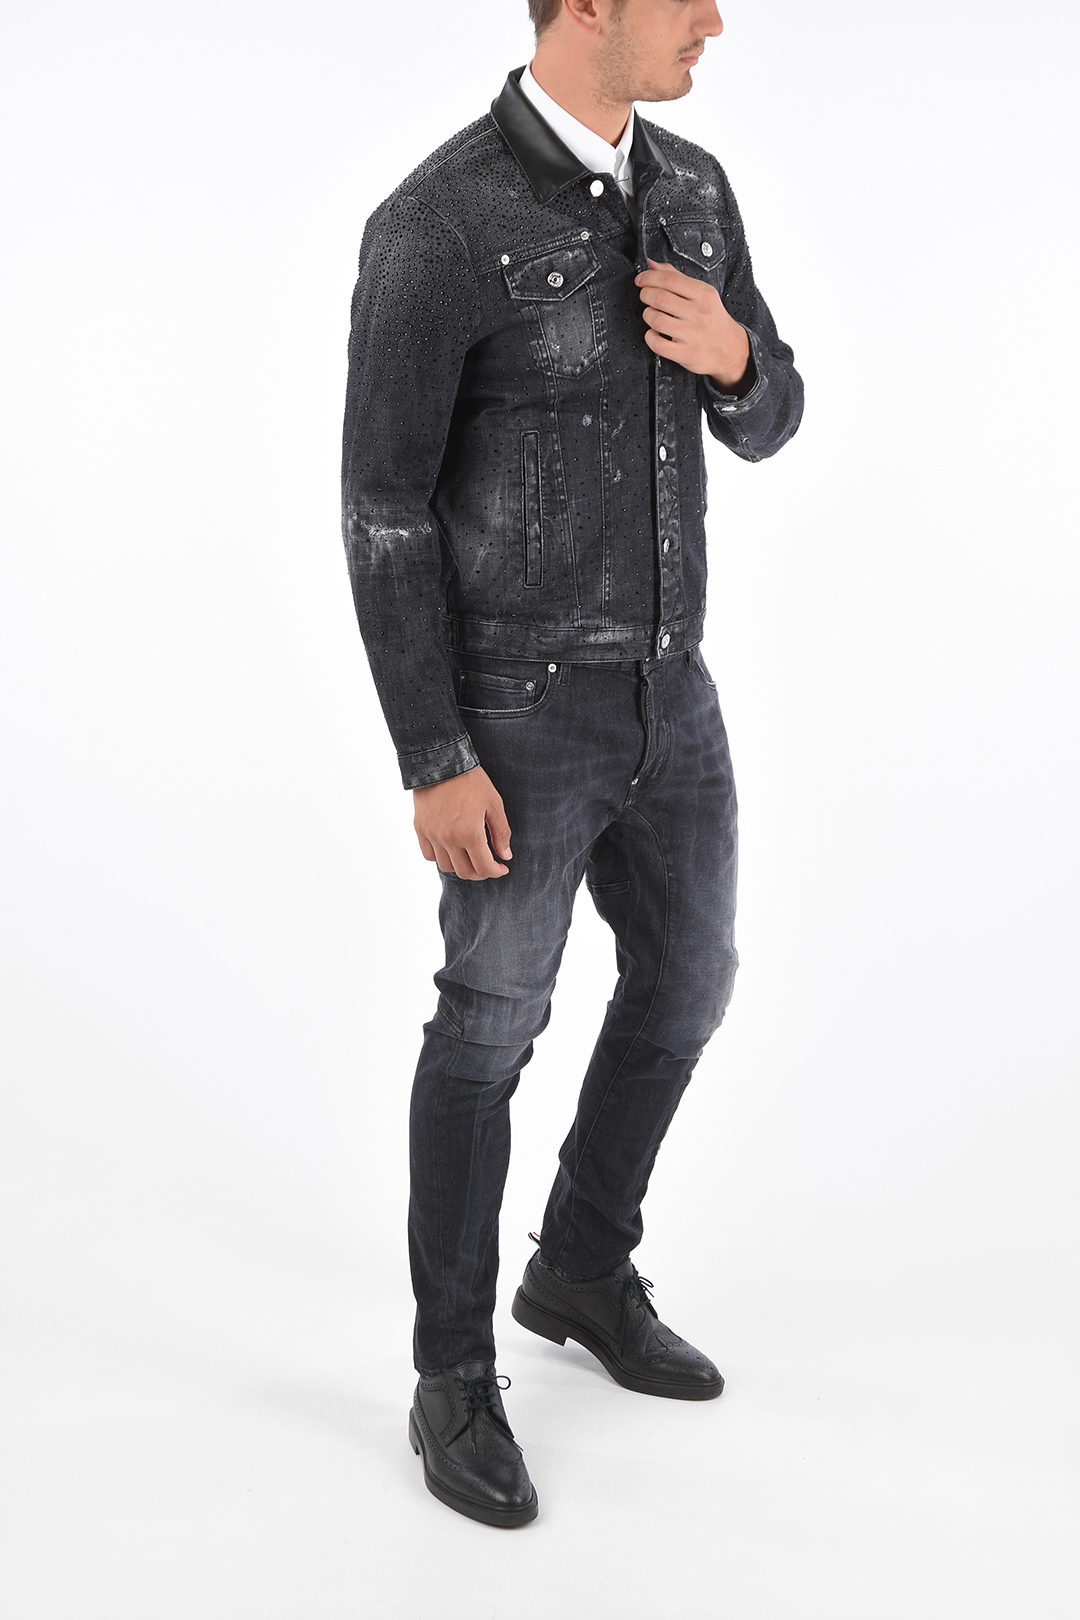 Discover more than 145 dsquared denim jacket latest